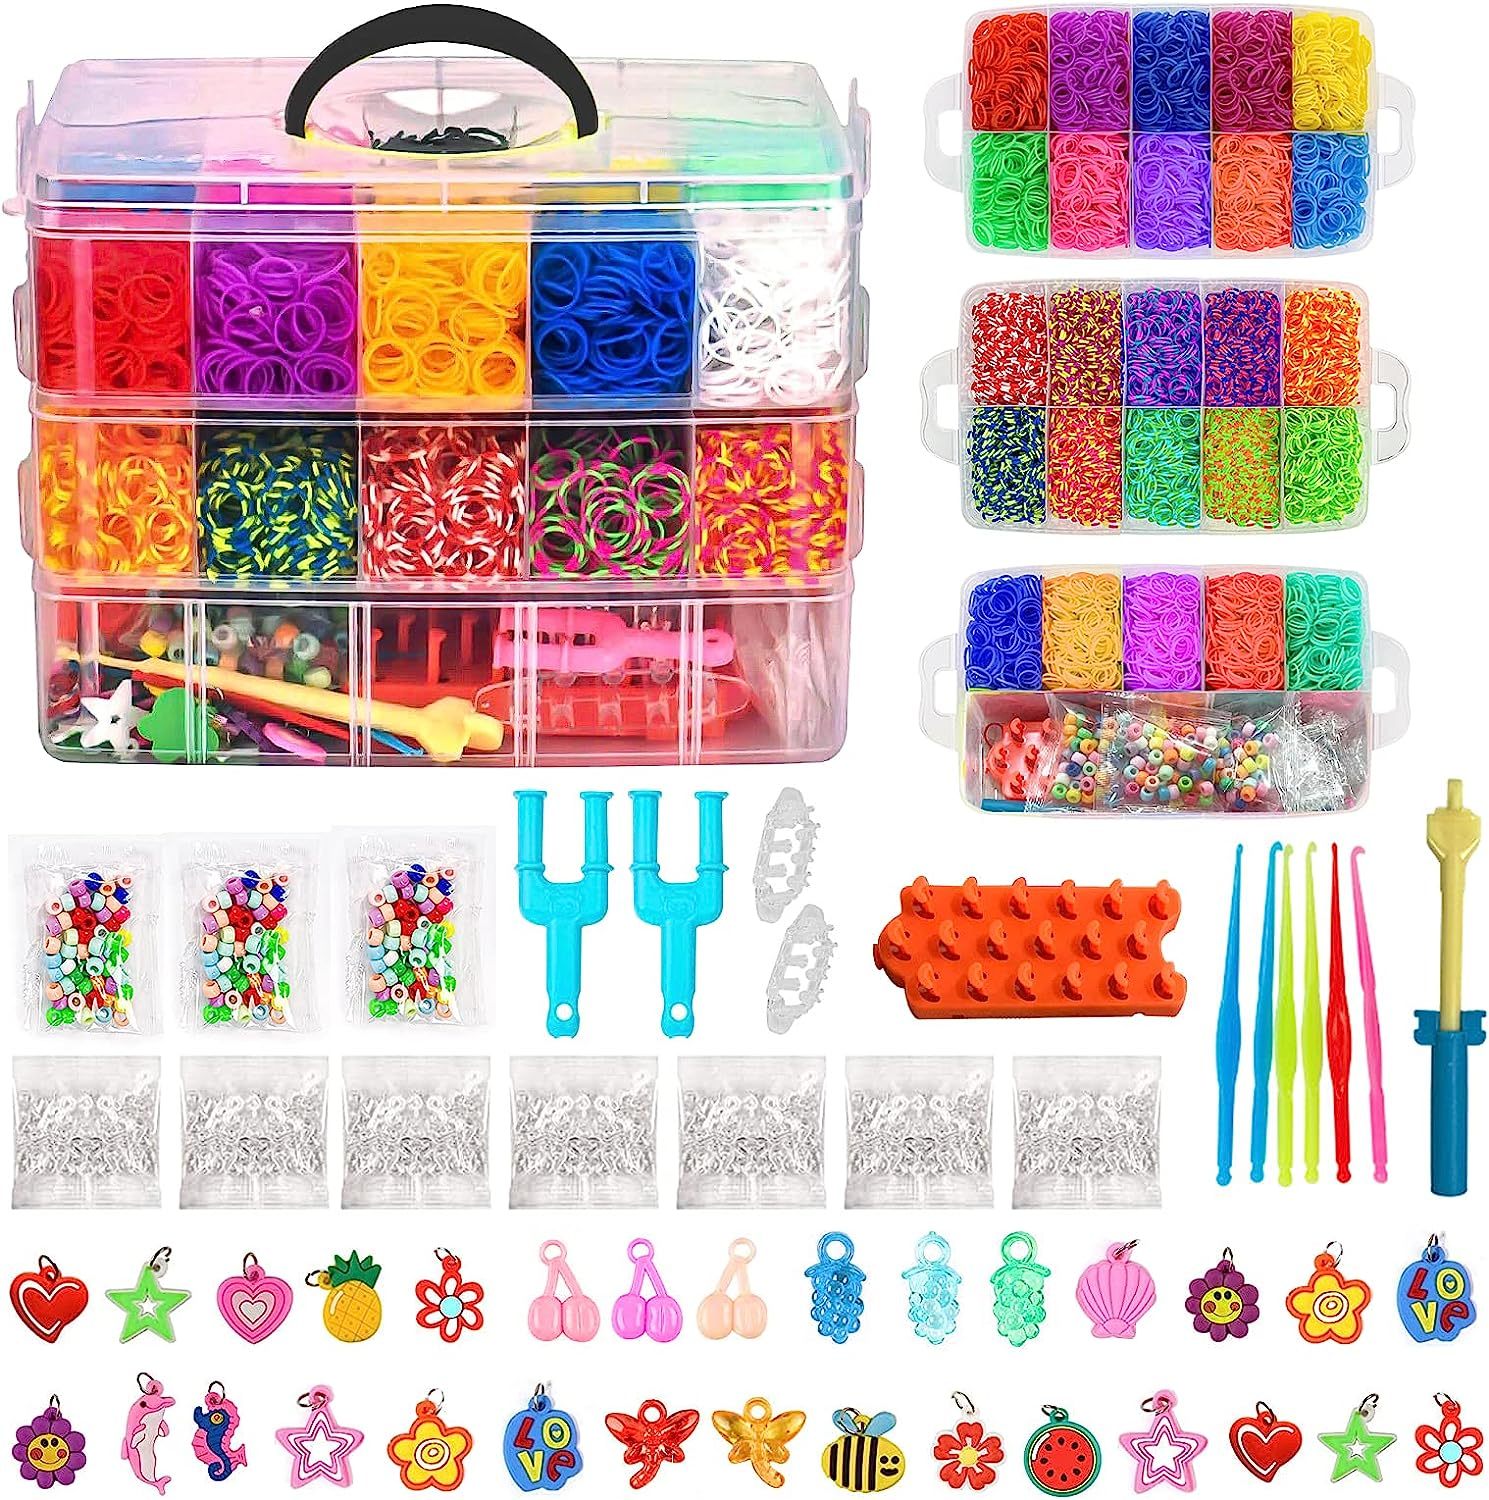 Colored rubber bands - Supplies - Office & School Supplies - The Craft  Shop, Inc.